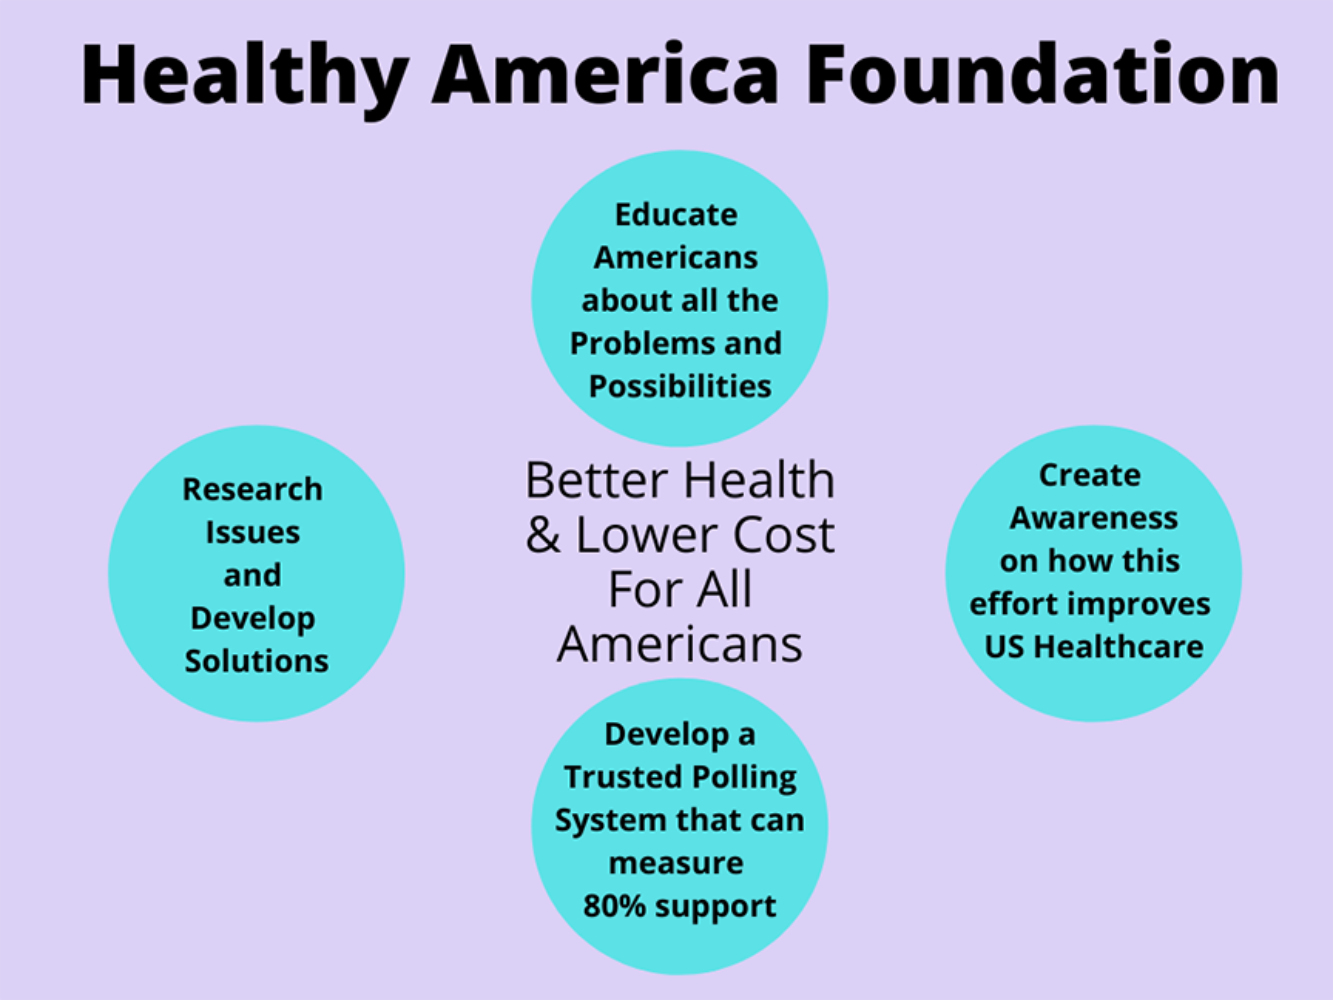 Help Americans fix US healthcare cost, coverage and quality